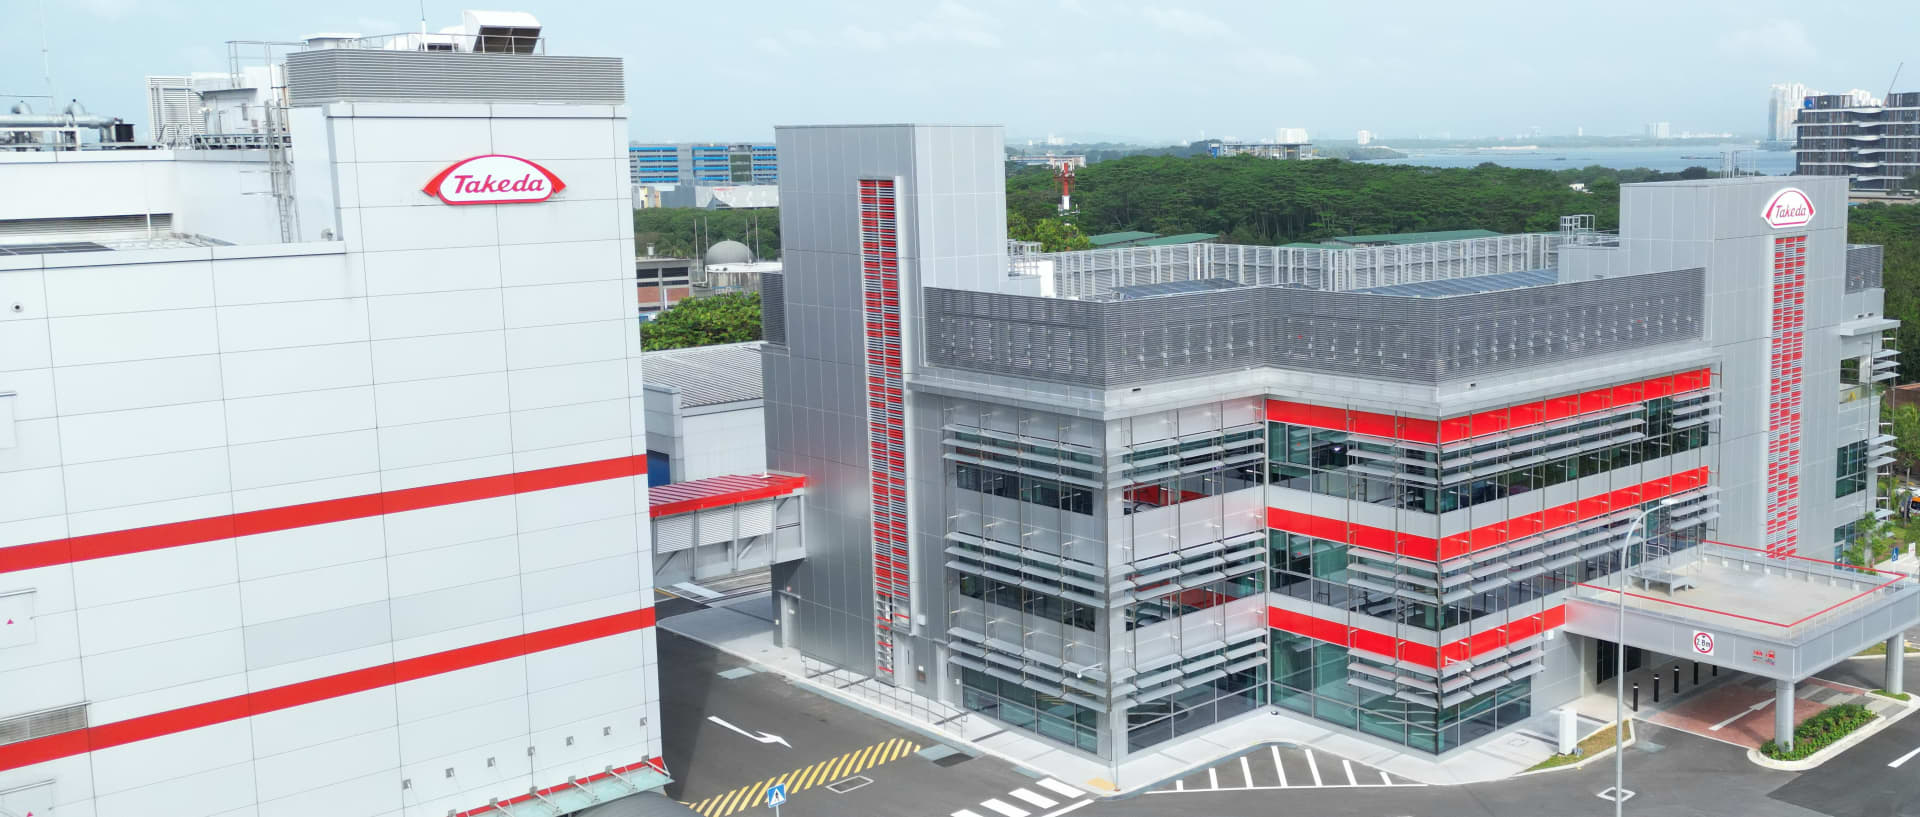 Takeda: This new building produces more energy than it uses